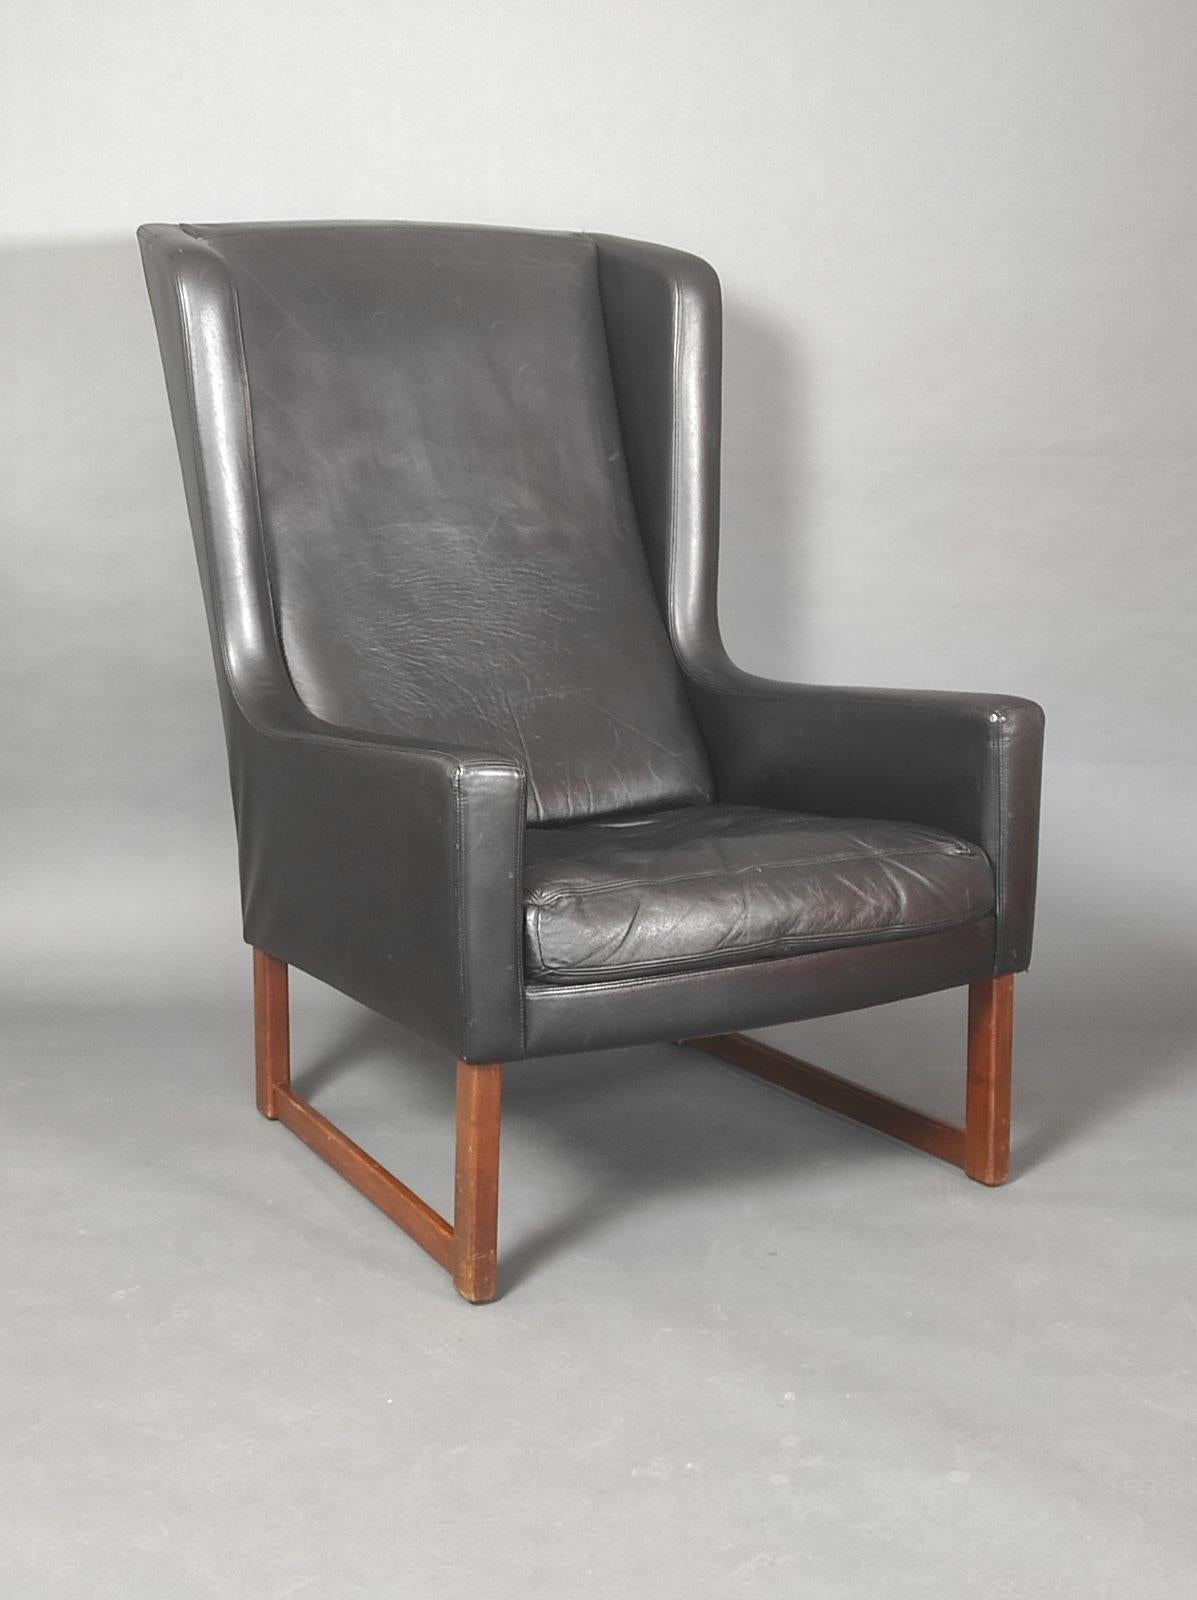 Vintage Leather Longue Chair By Rudolf B. Glatzel for Alfred Kill 1960s In Fair Condition For Sale In Čelinac, BA